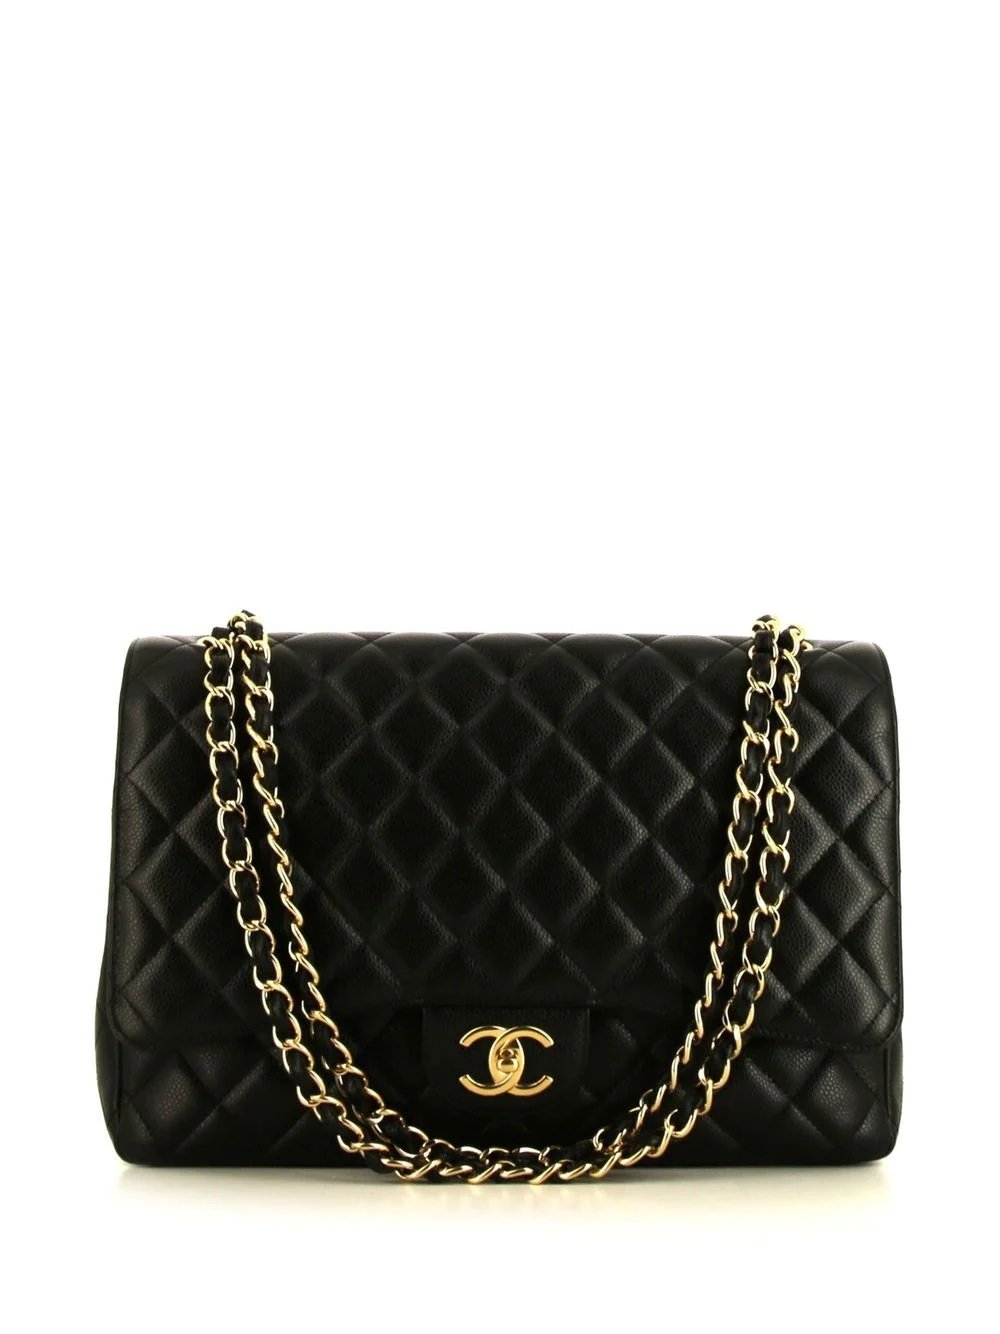 quilted chanel crossbody bag black